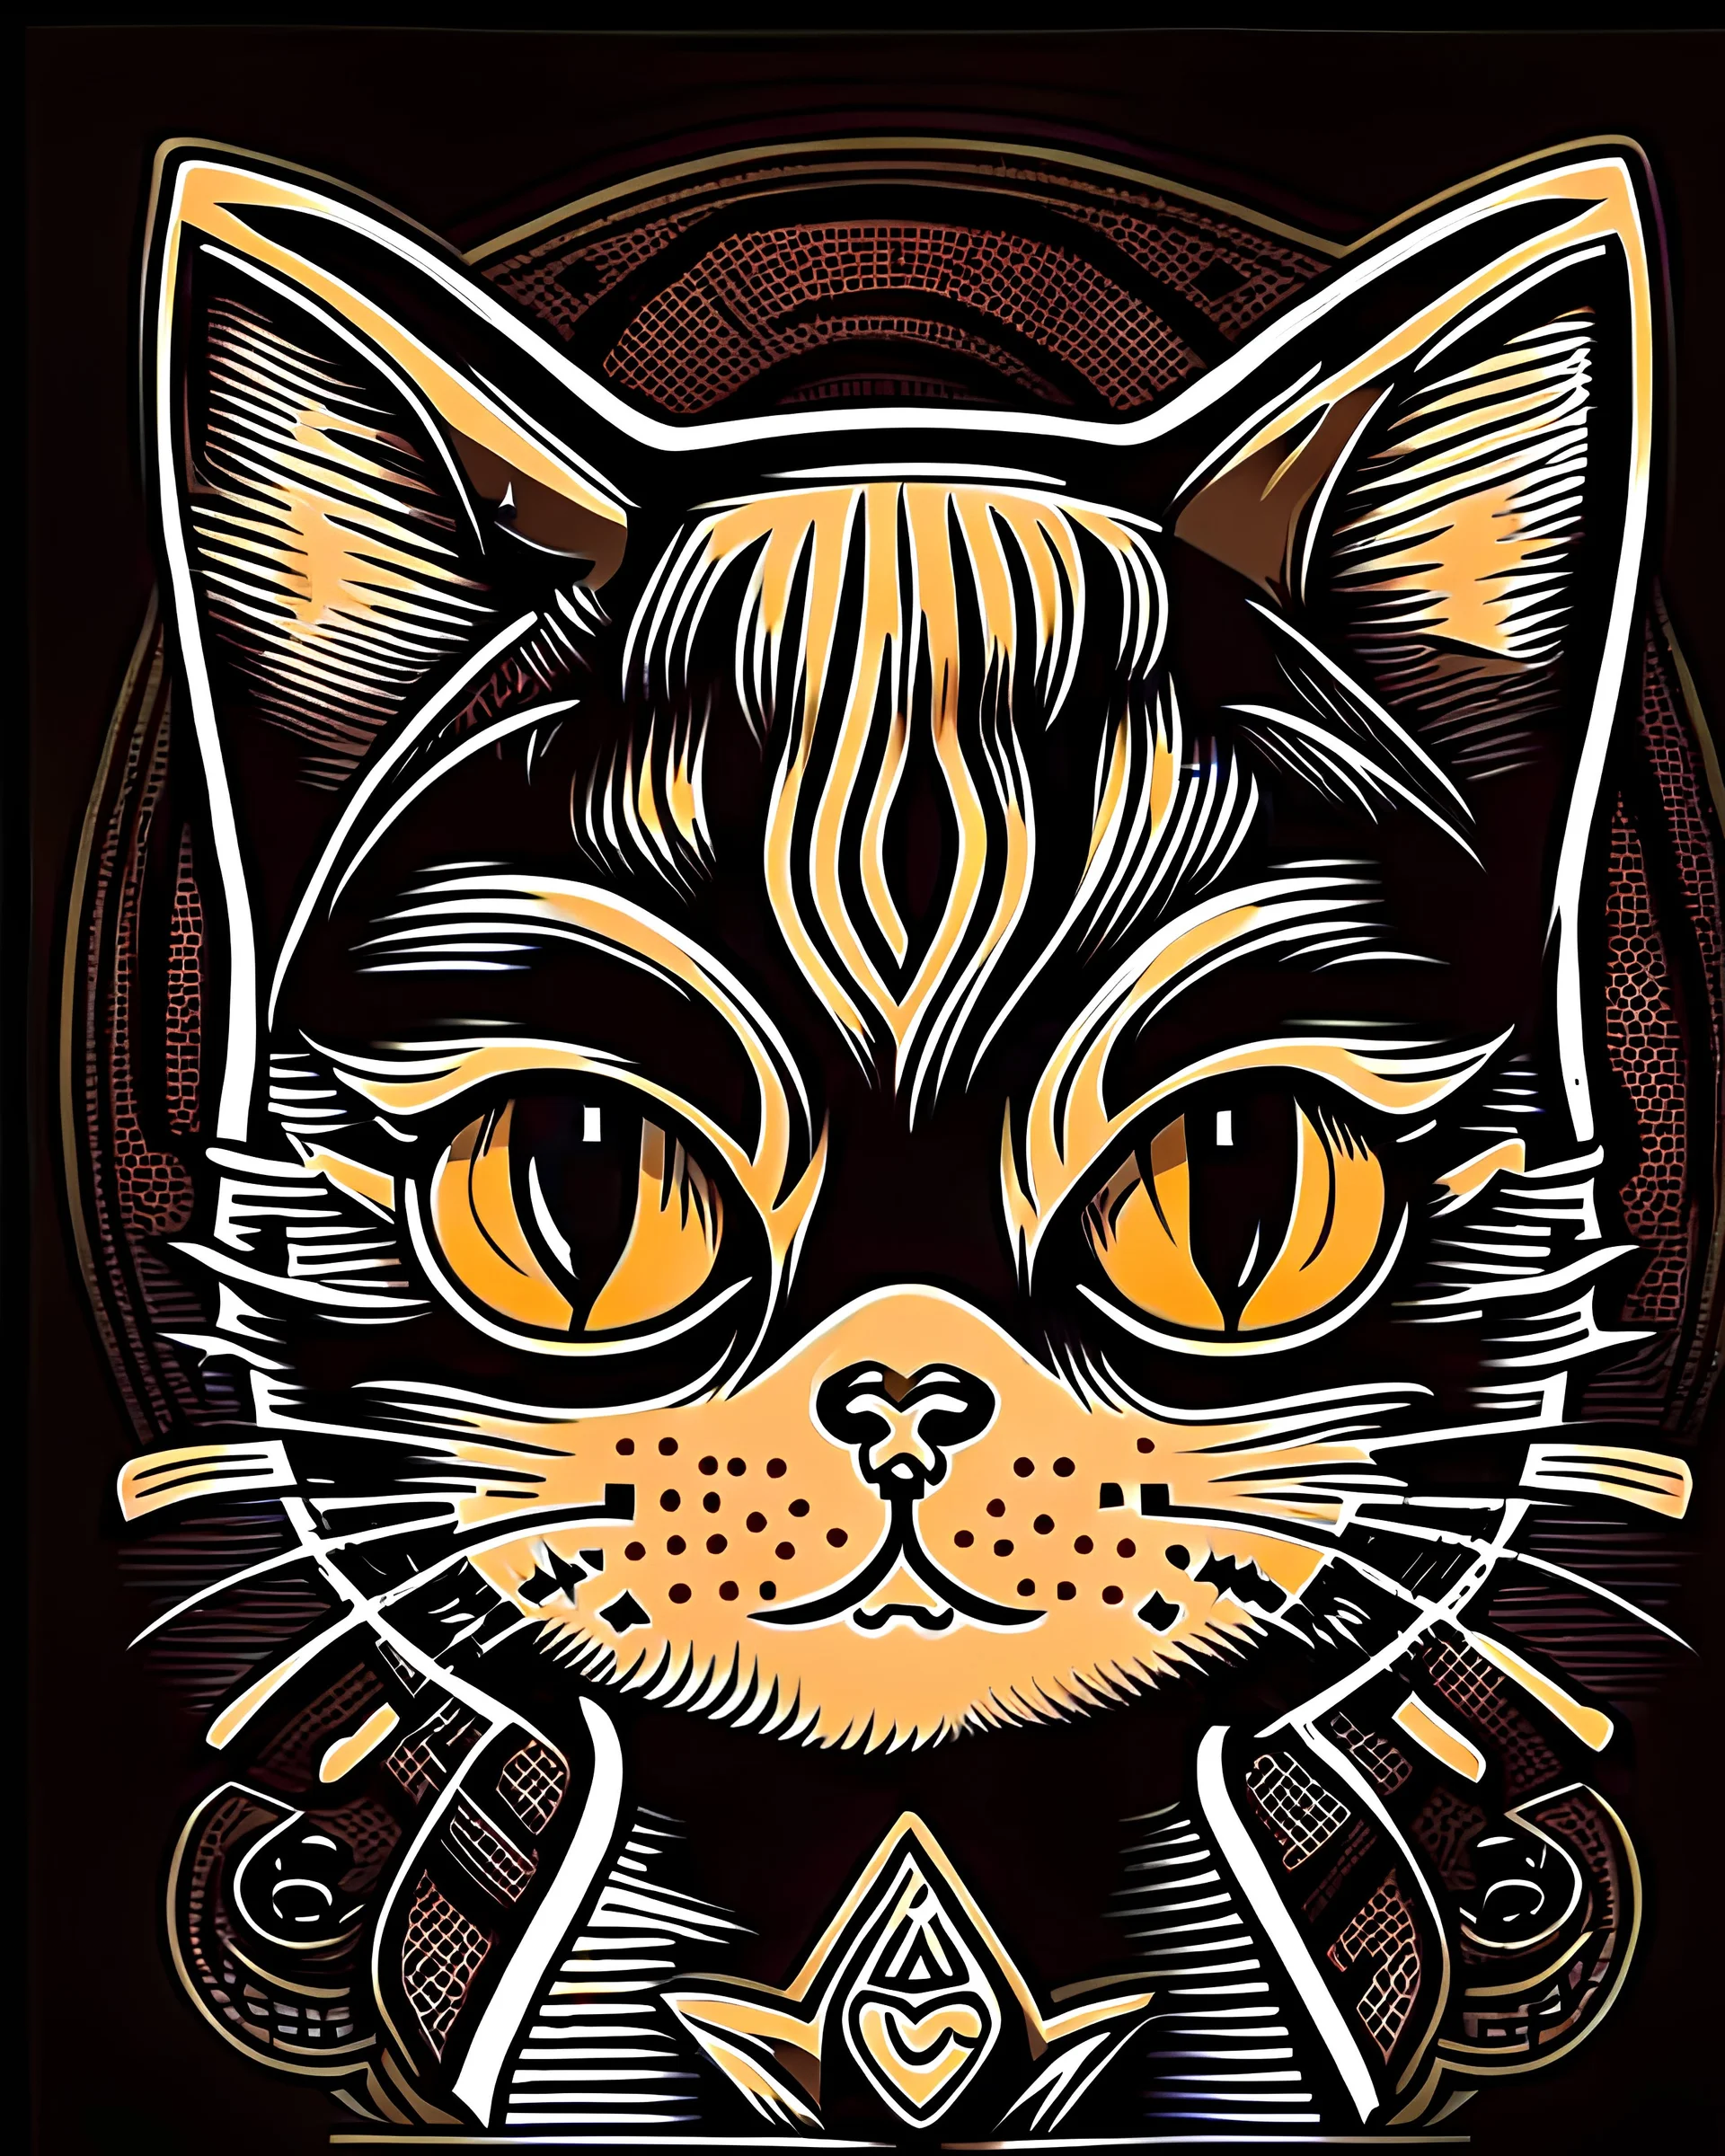 Cute cat face cartoon character, shepard fairey style graphic, black simple background.